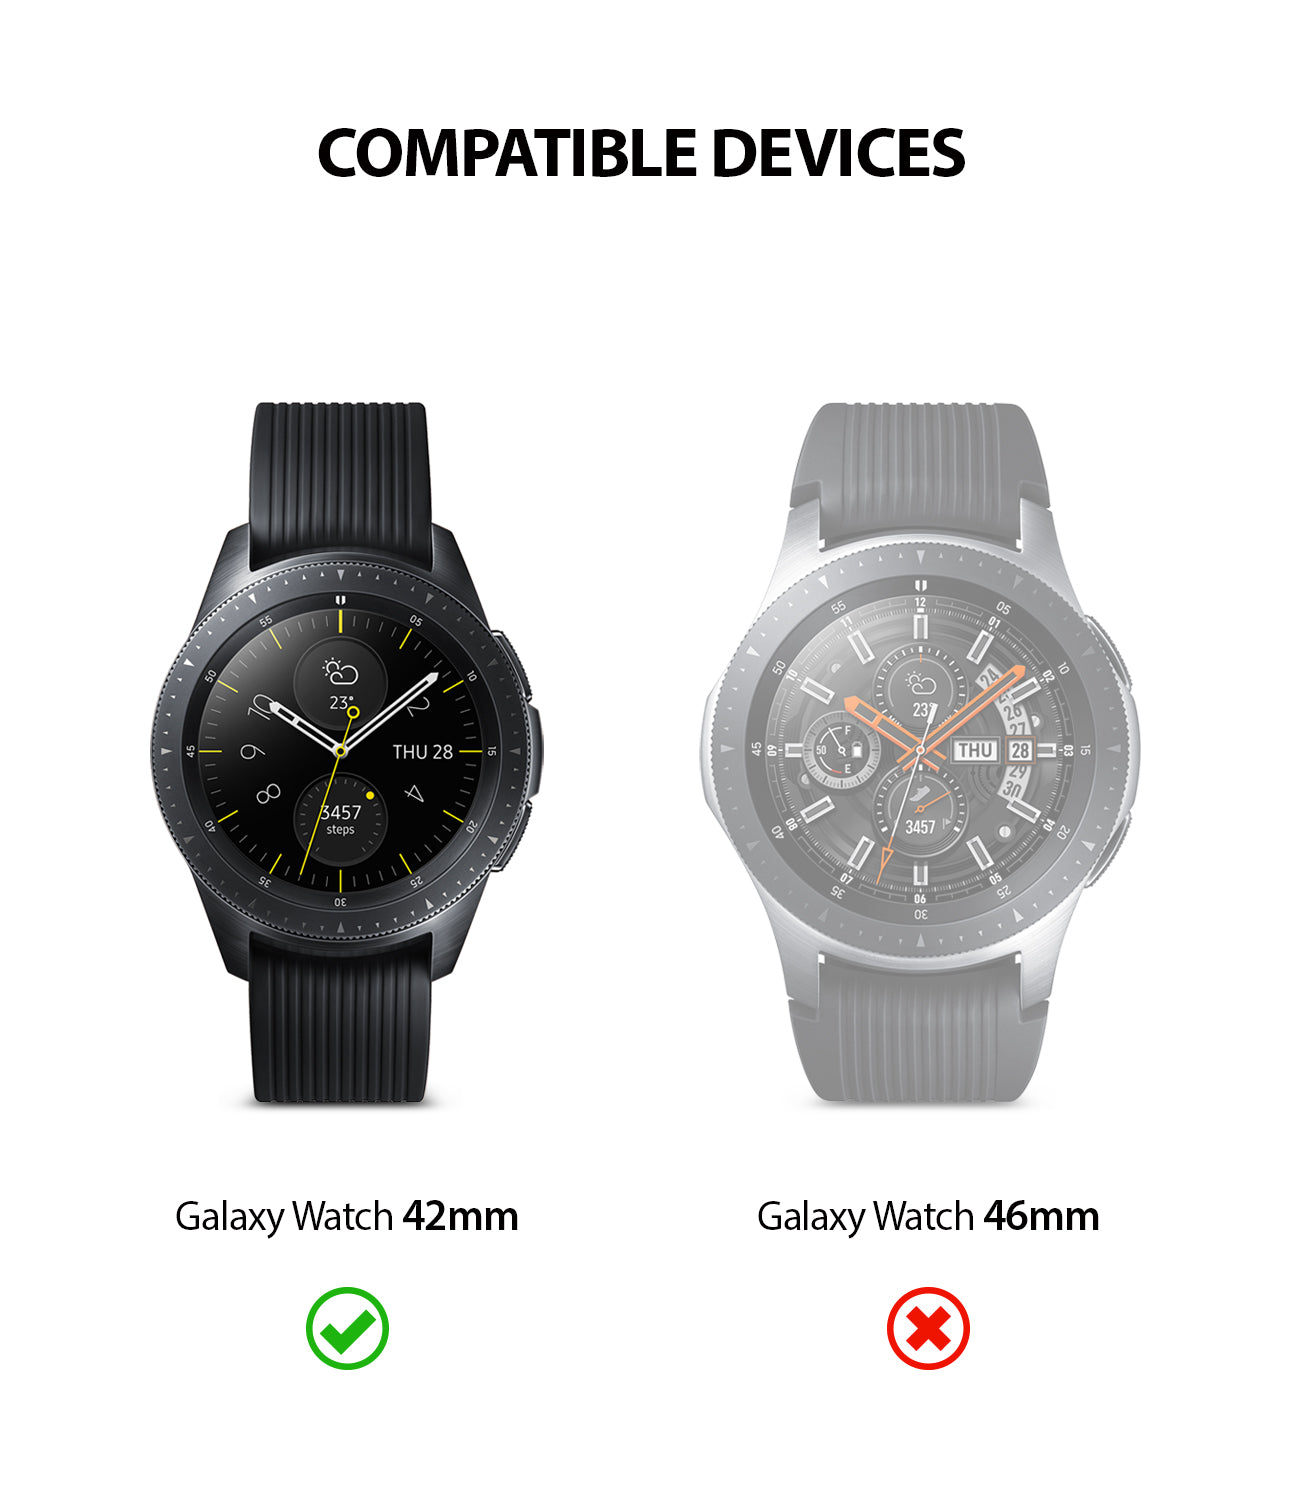 only compatible with galaxy watch 42mm